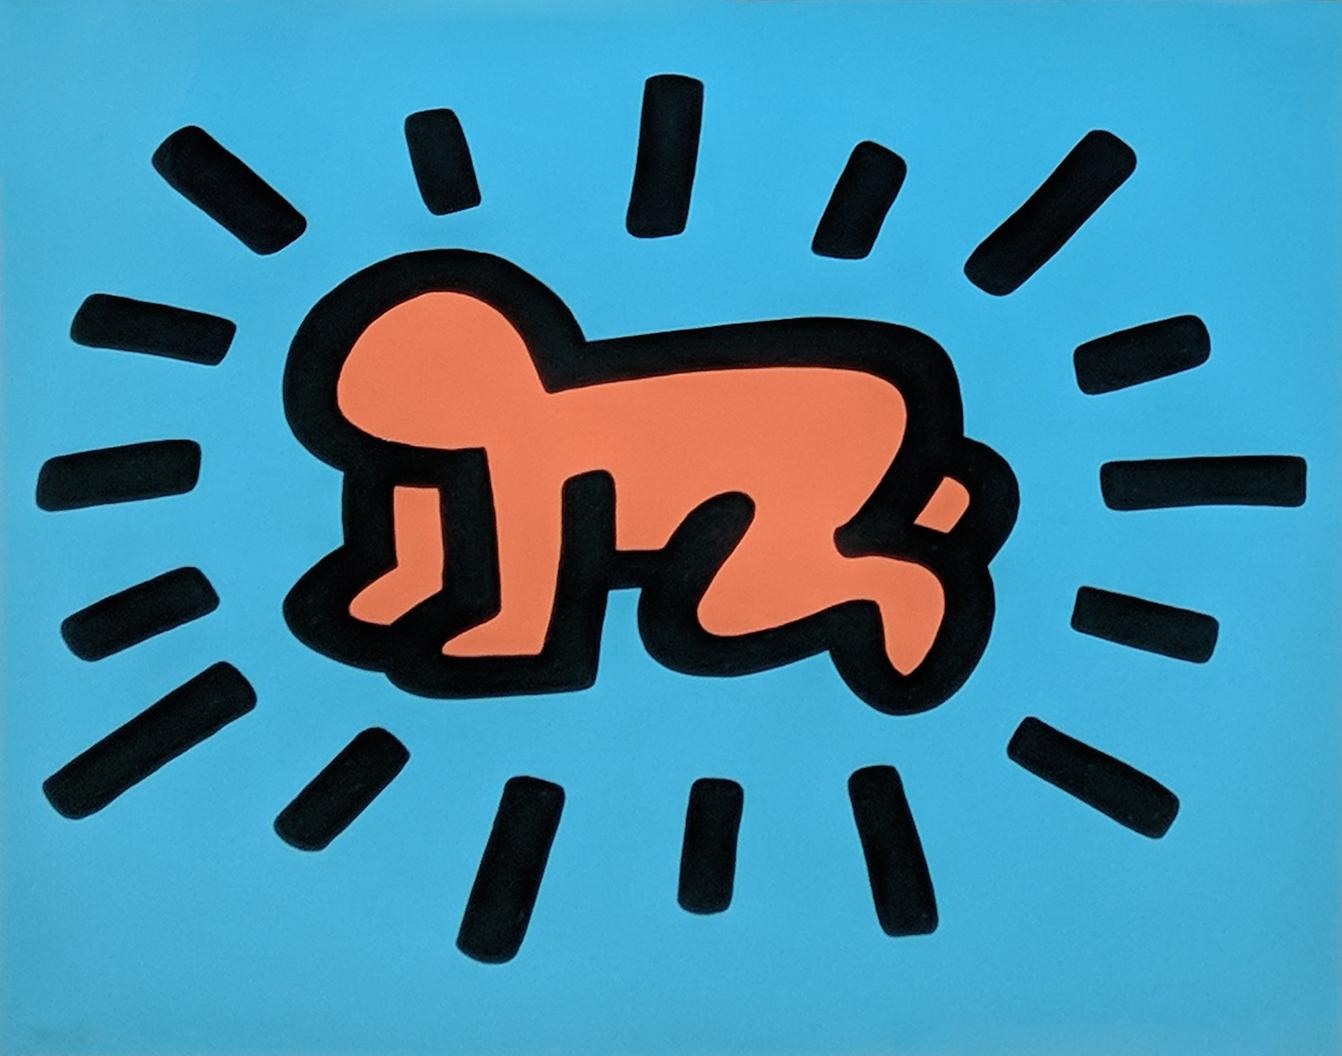 Keith Haring Portrait Print - RADIANT BABY (FROM ICON SERIES)